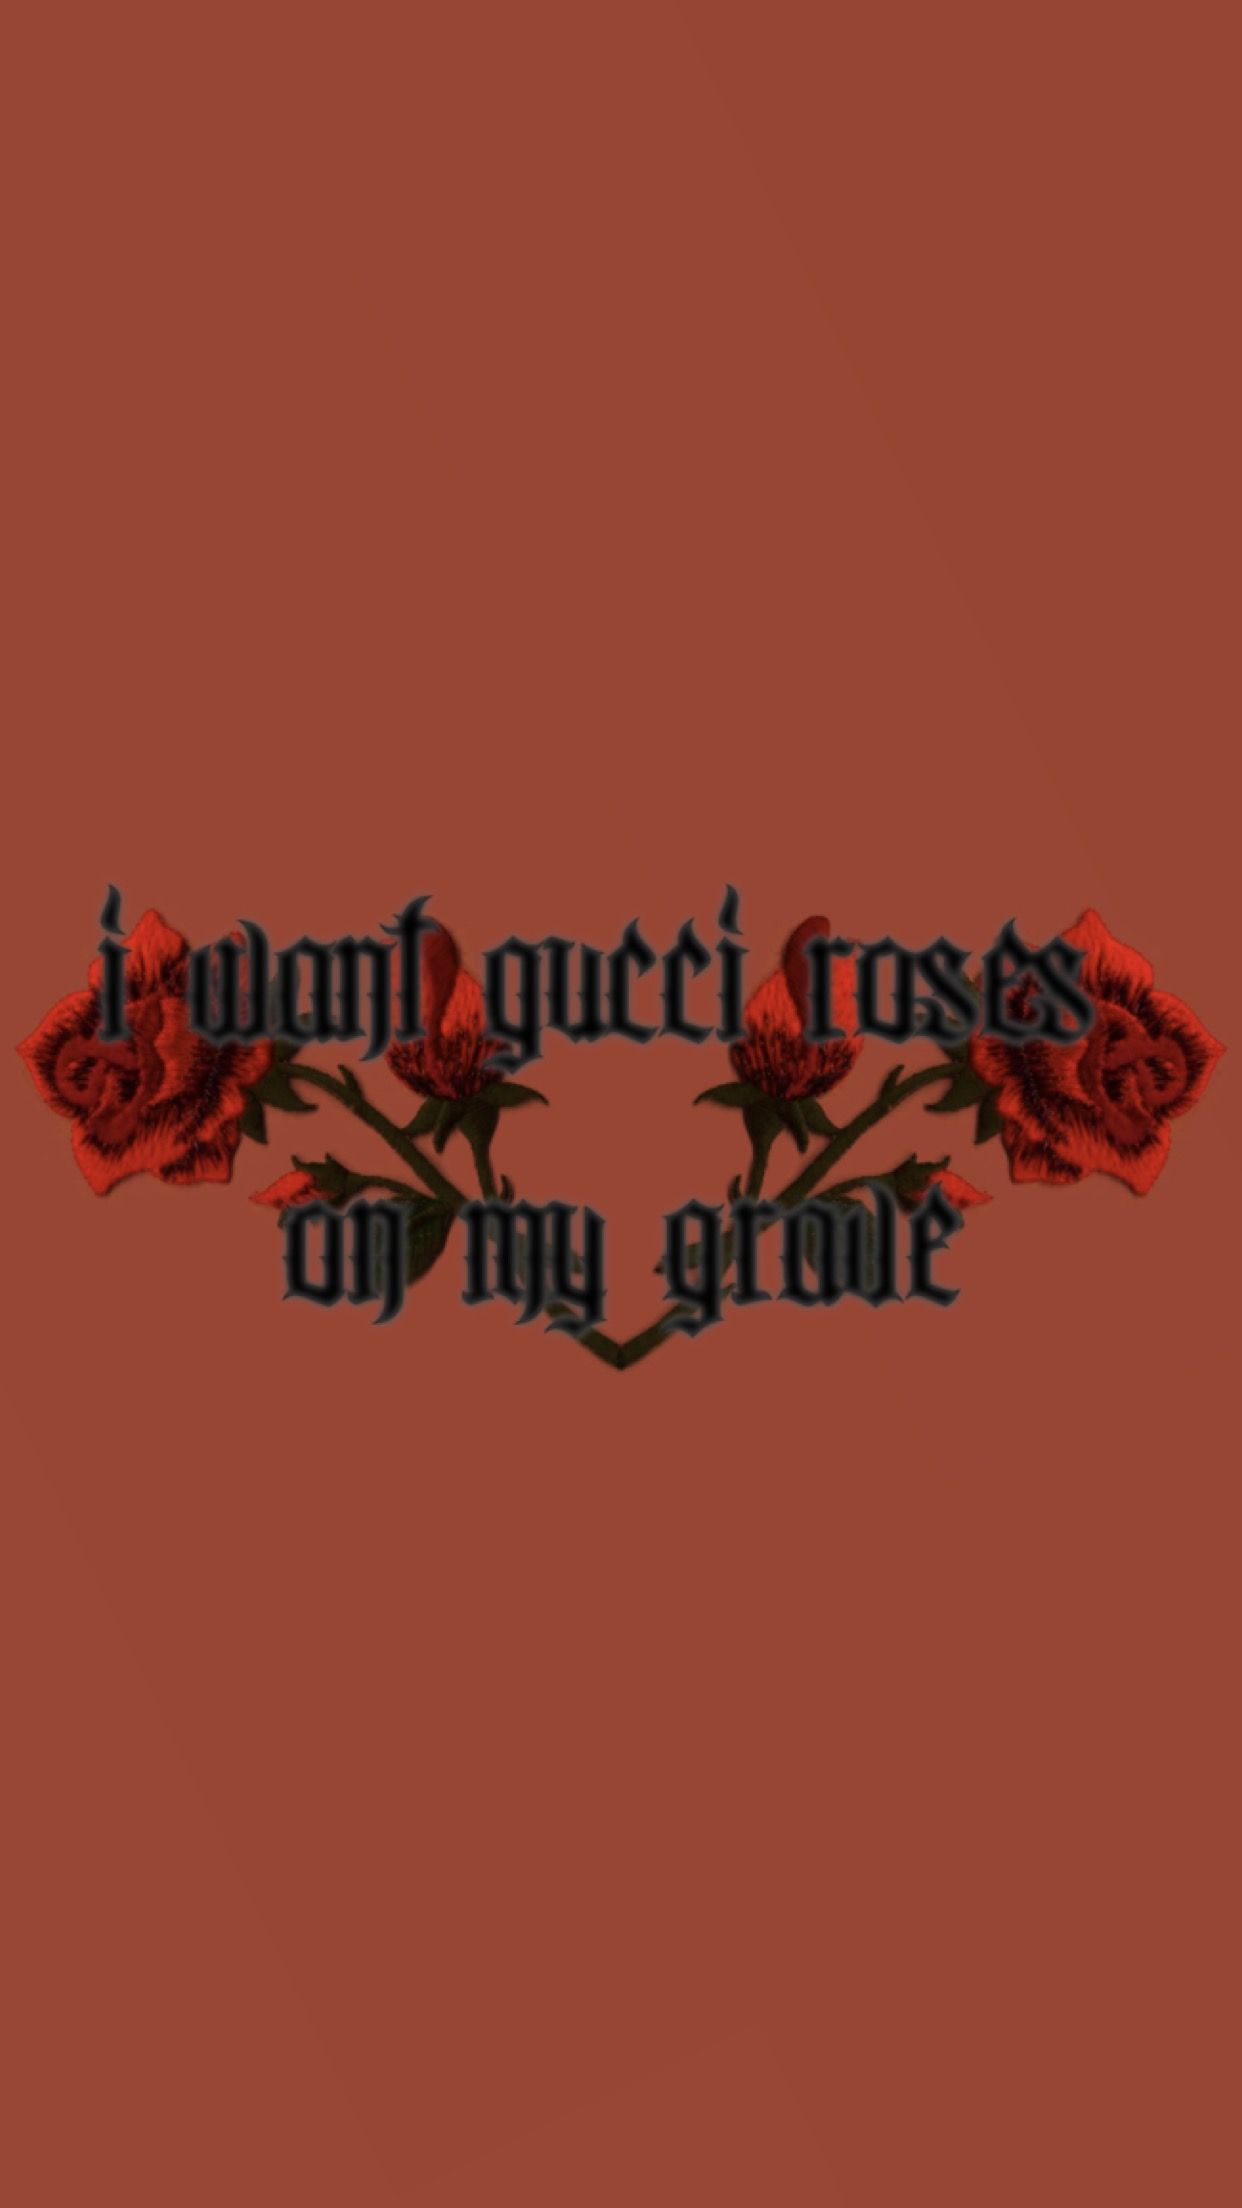 I want Gucci roses on my grave wallpaper. made by Laurette. instagram:. Rose wallpaper, Wallpaper, Lock screen wallpaper